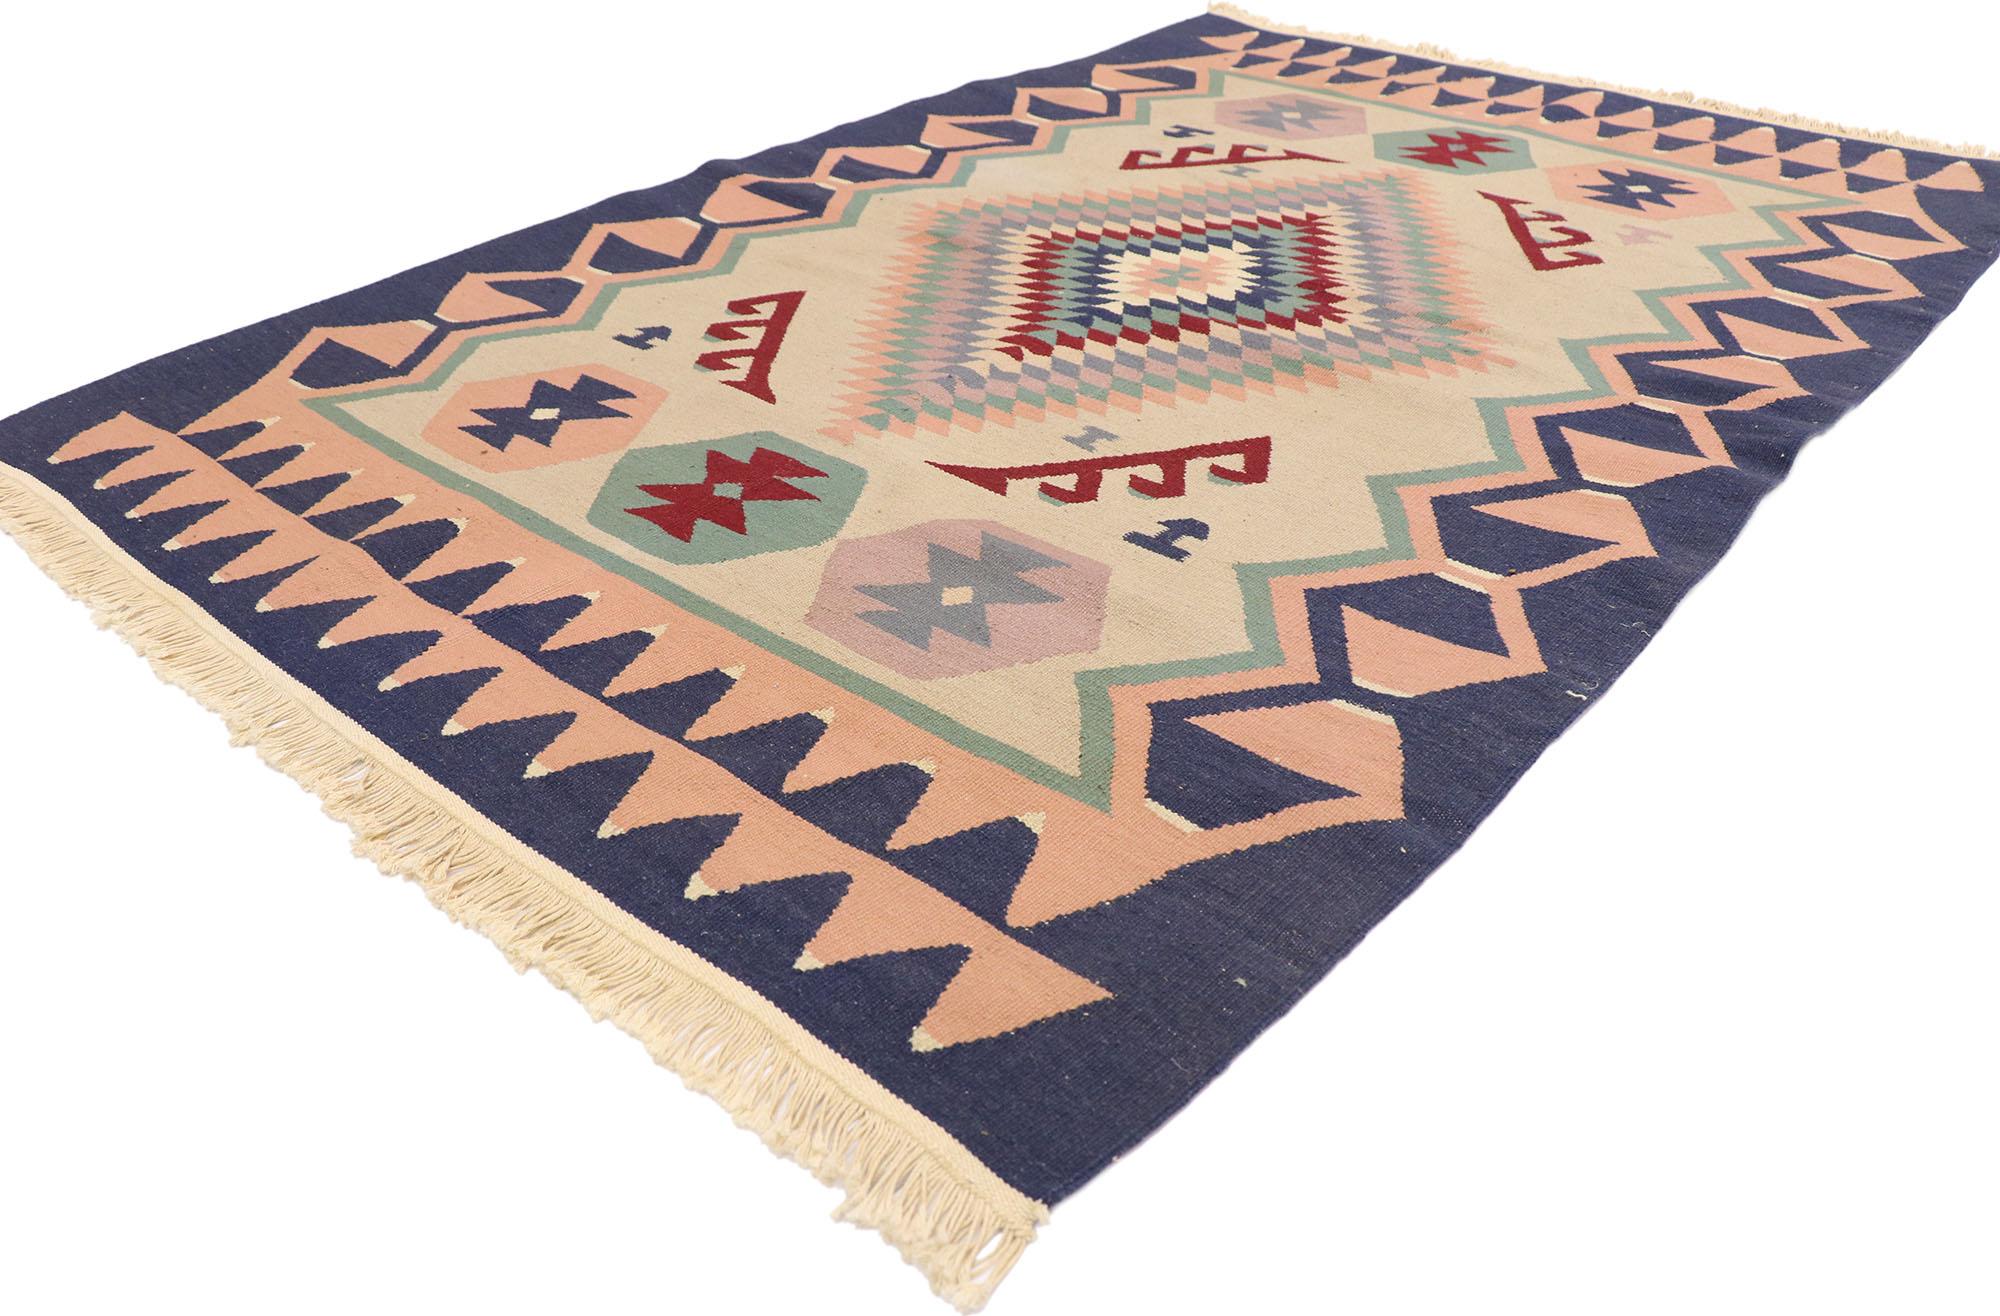 77987 Vintage Persian Shiraz Kilim rug with Tribal Style 03'10 x 05'10. Full of tiny details and a bold expressive design combined with vibrant colors and tribal style, this hand-woven wool vintage Persian Shiraz kilim rug is a captivating vision of